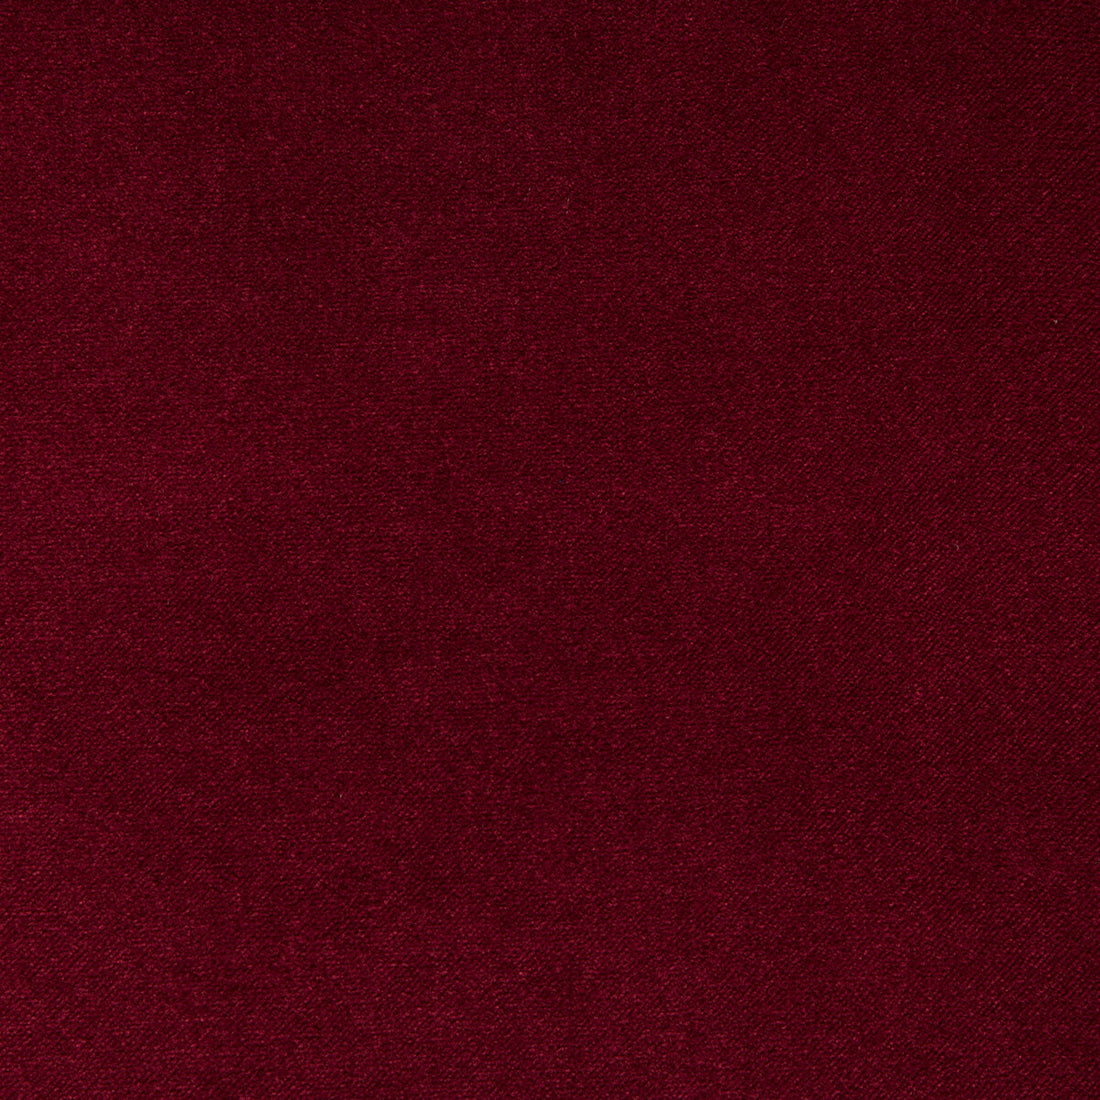 Madison Velvet fabric in cranberry color - pattern 35402.9.0 - by Kravet Contract